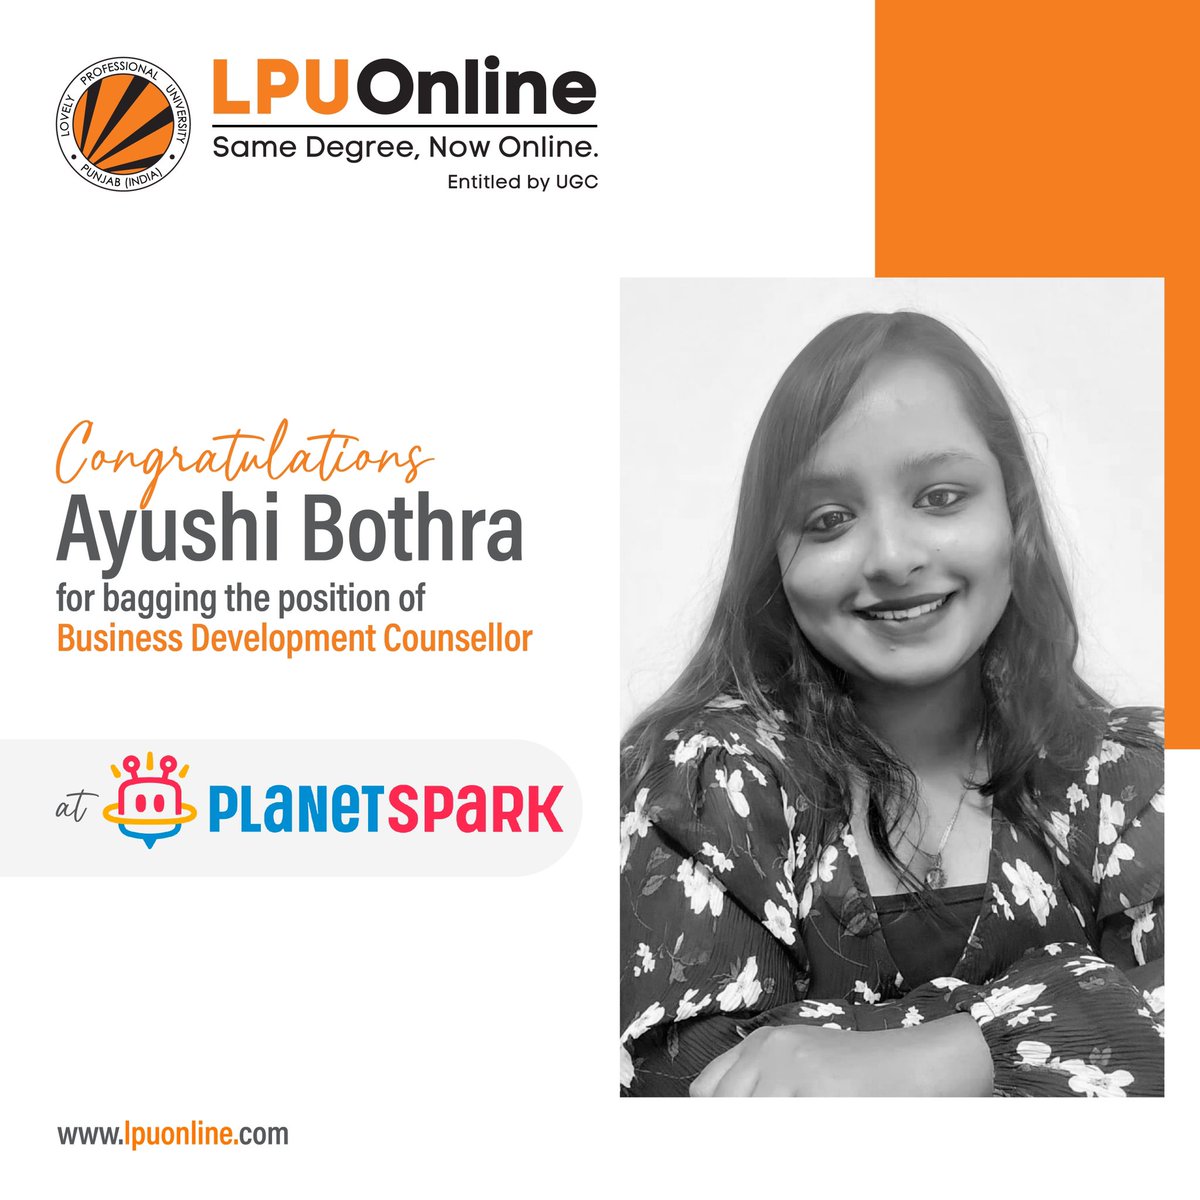 It's a result of constant hard work & corrective guidance.
#Congratulations Ayushi Bothra for starting your career on a high note.

We're extremely elated by your achievement.
All the best.

#PlacementDrive #CareerGrowth #Placement #BusinessDevelopment #LPUOnline